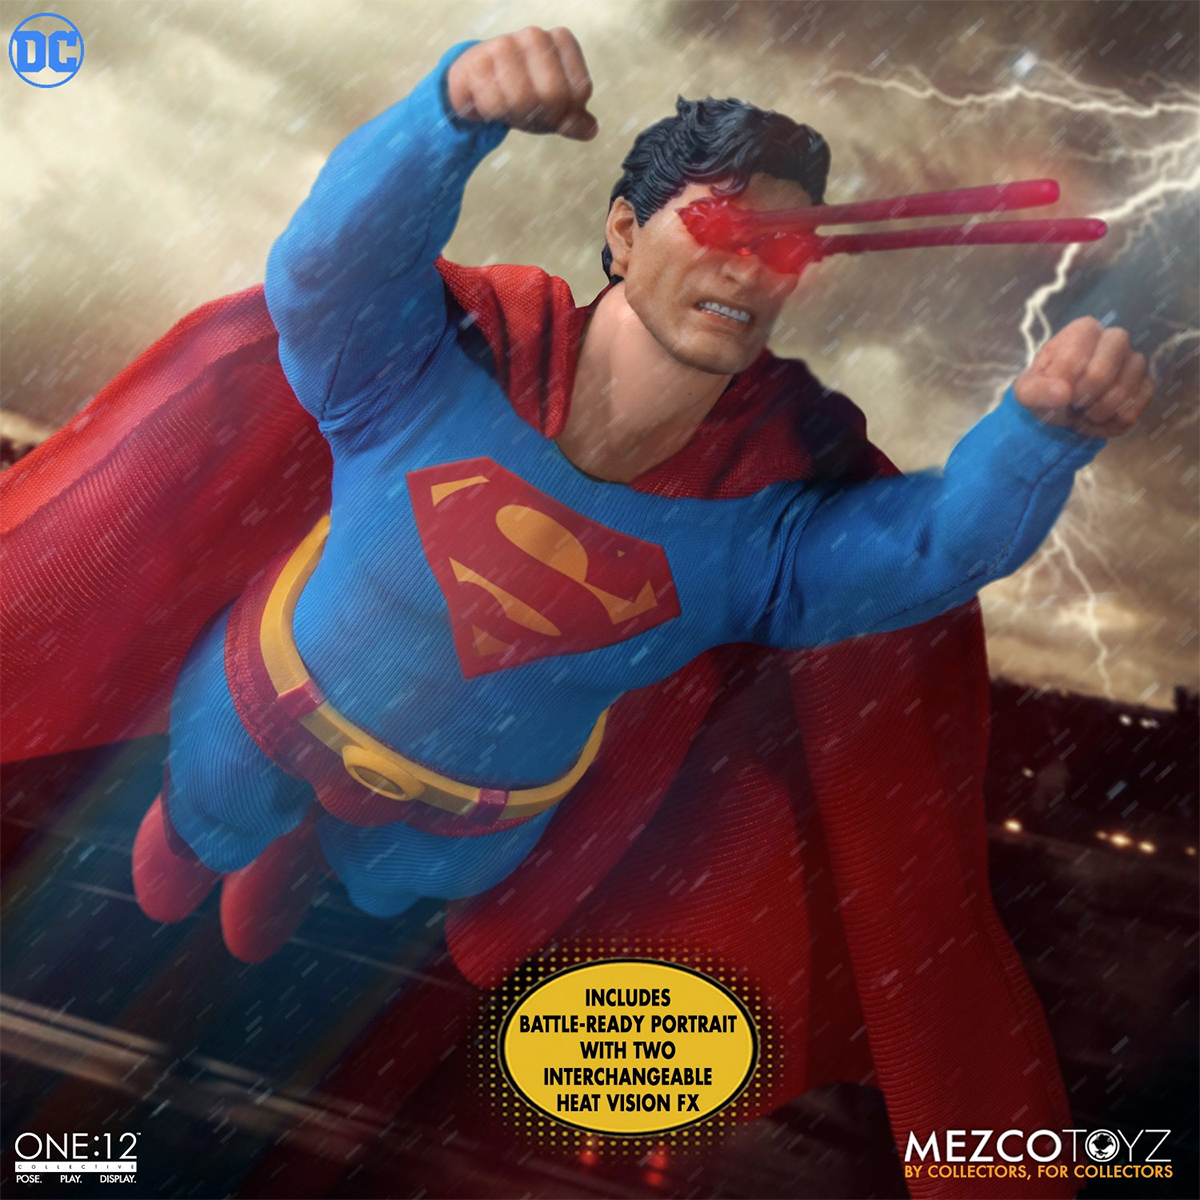 Superman - Man of Steel Edition One:12 Collective Action Figure